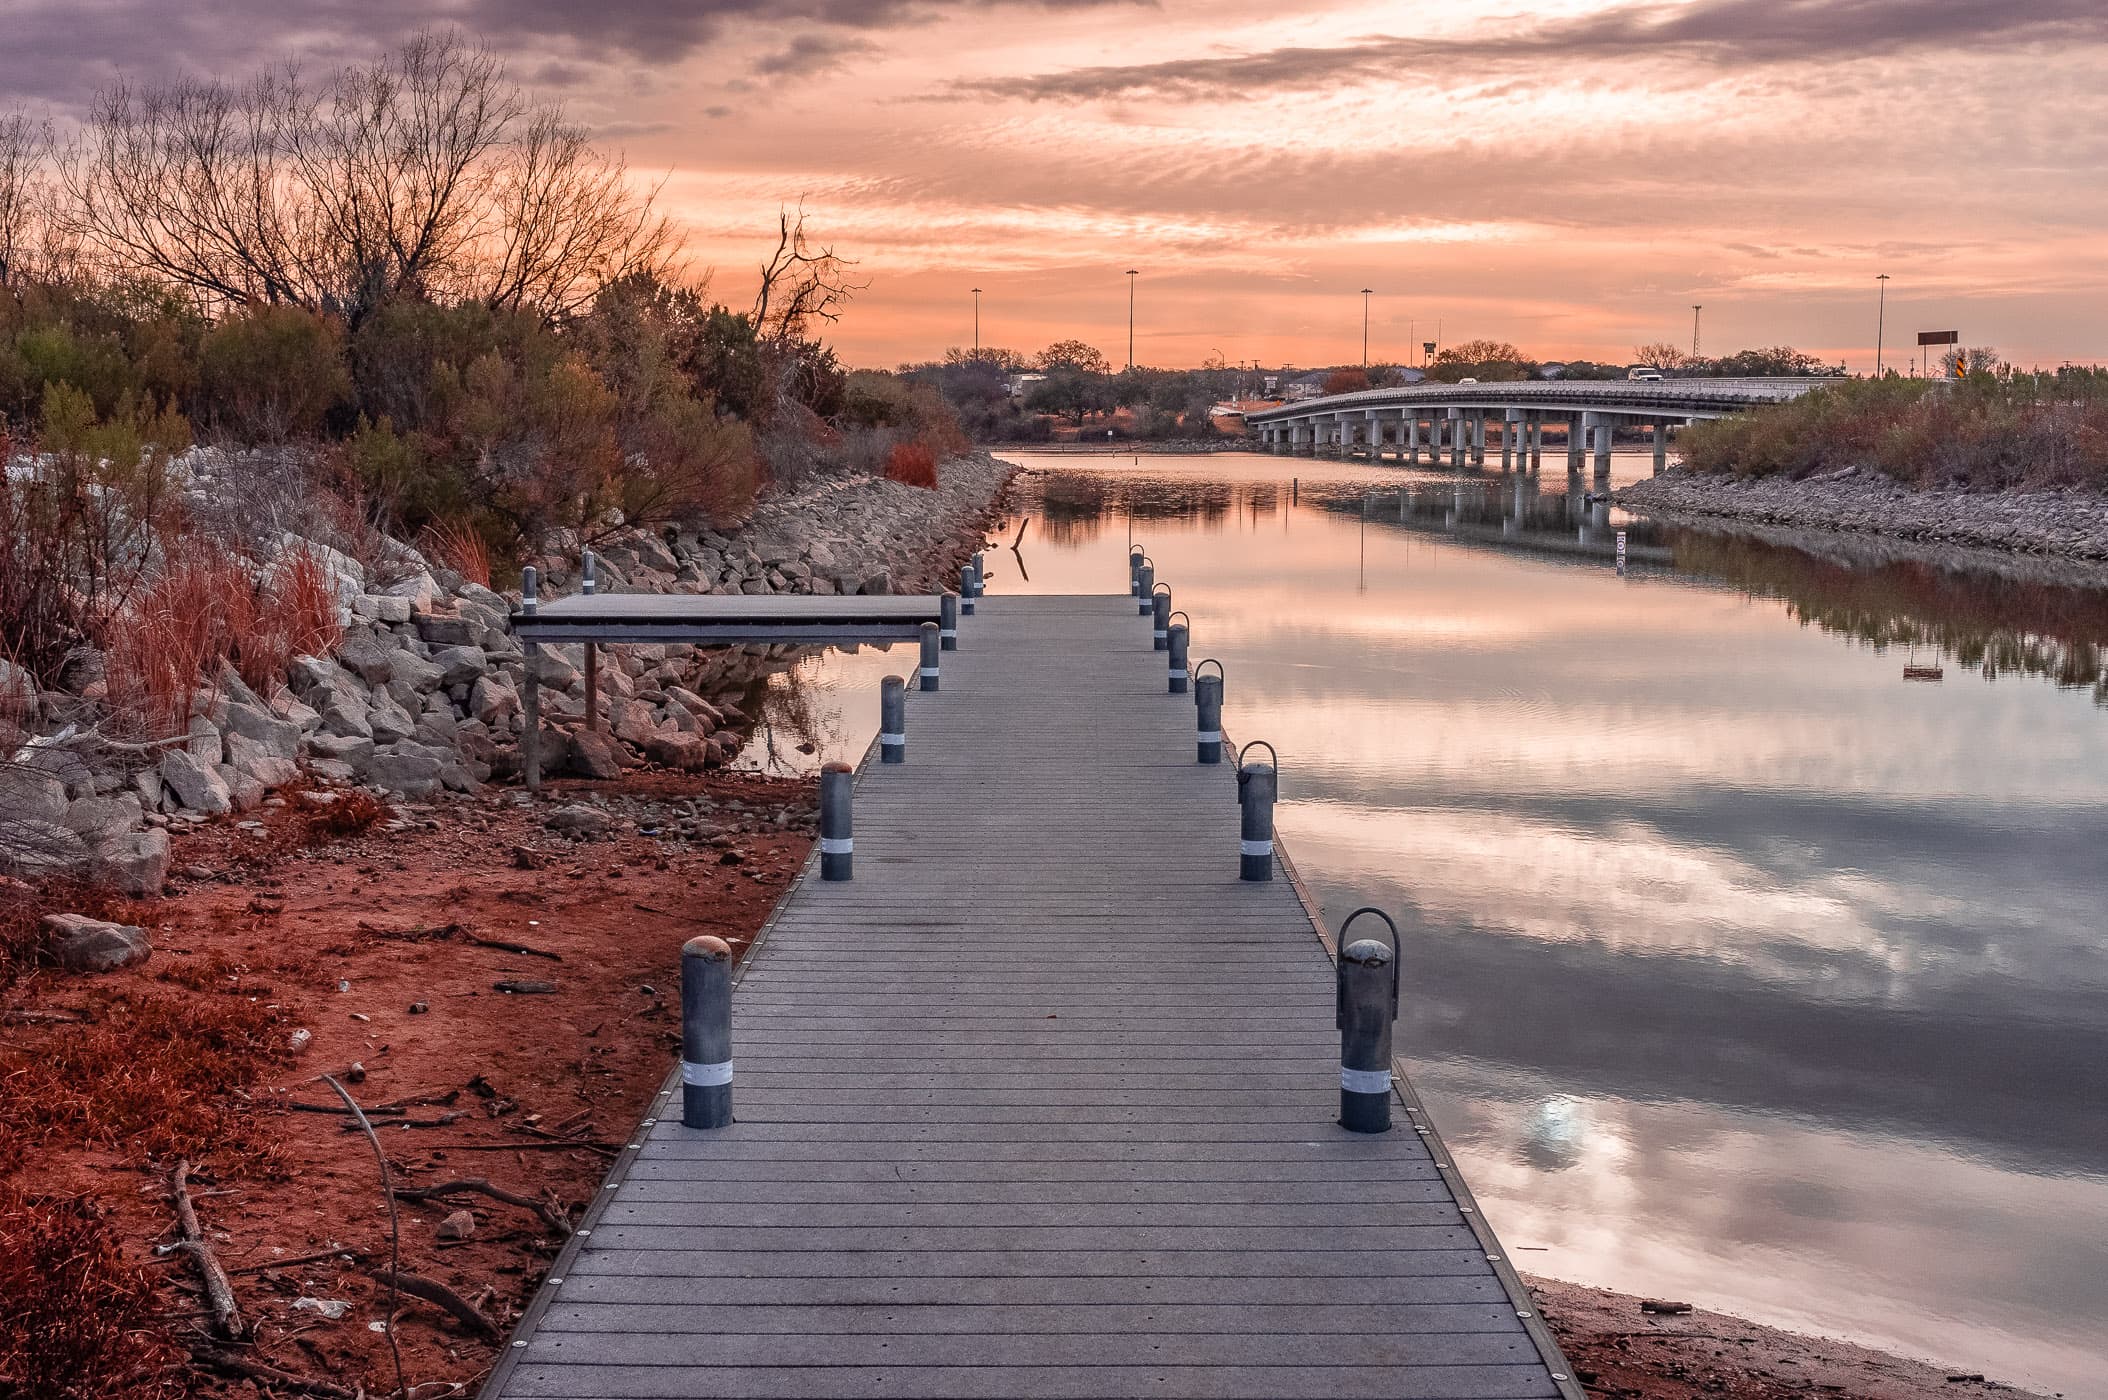 A pier—made almost useless by low water levels—greets the morning sun at Lake Granbury, Texas.